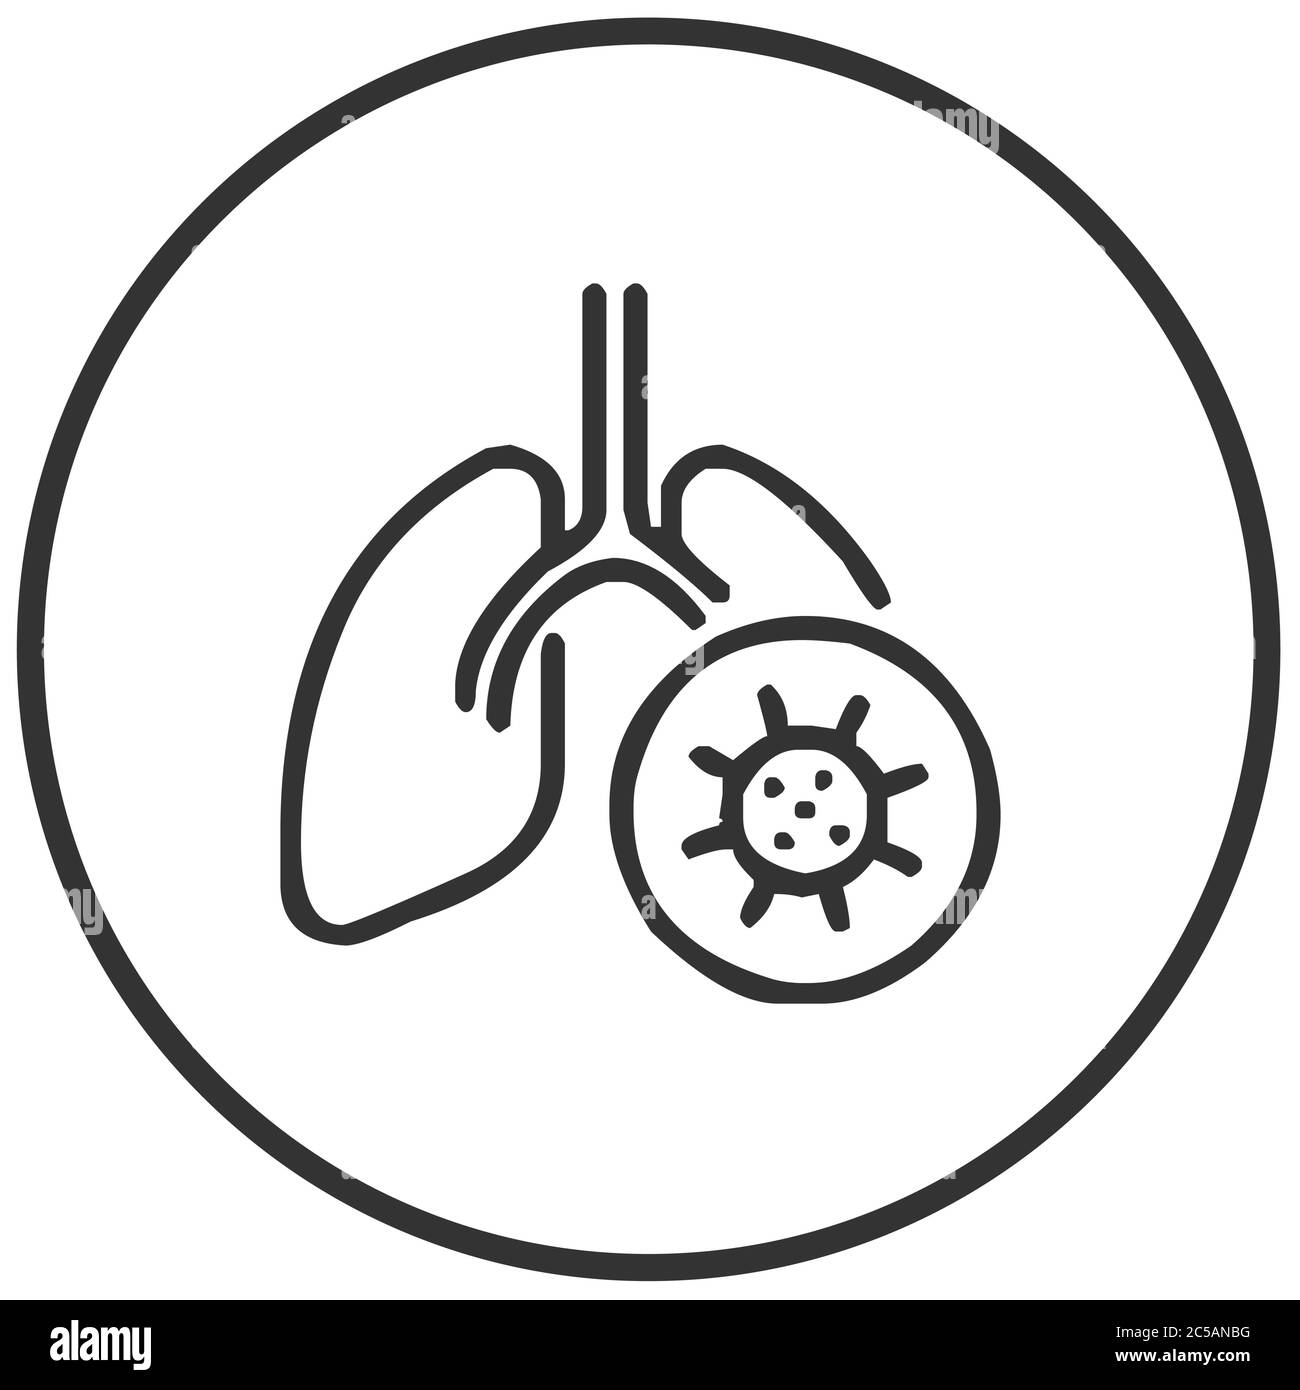 Lungs infected with virus icon vector illustration Stock Vector